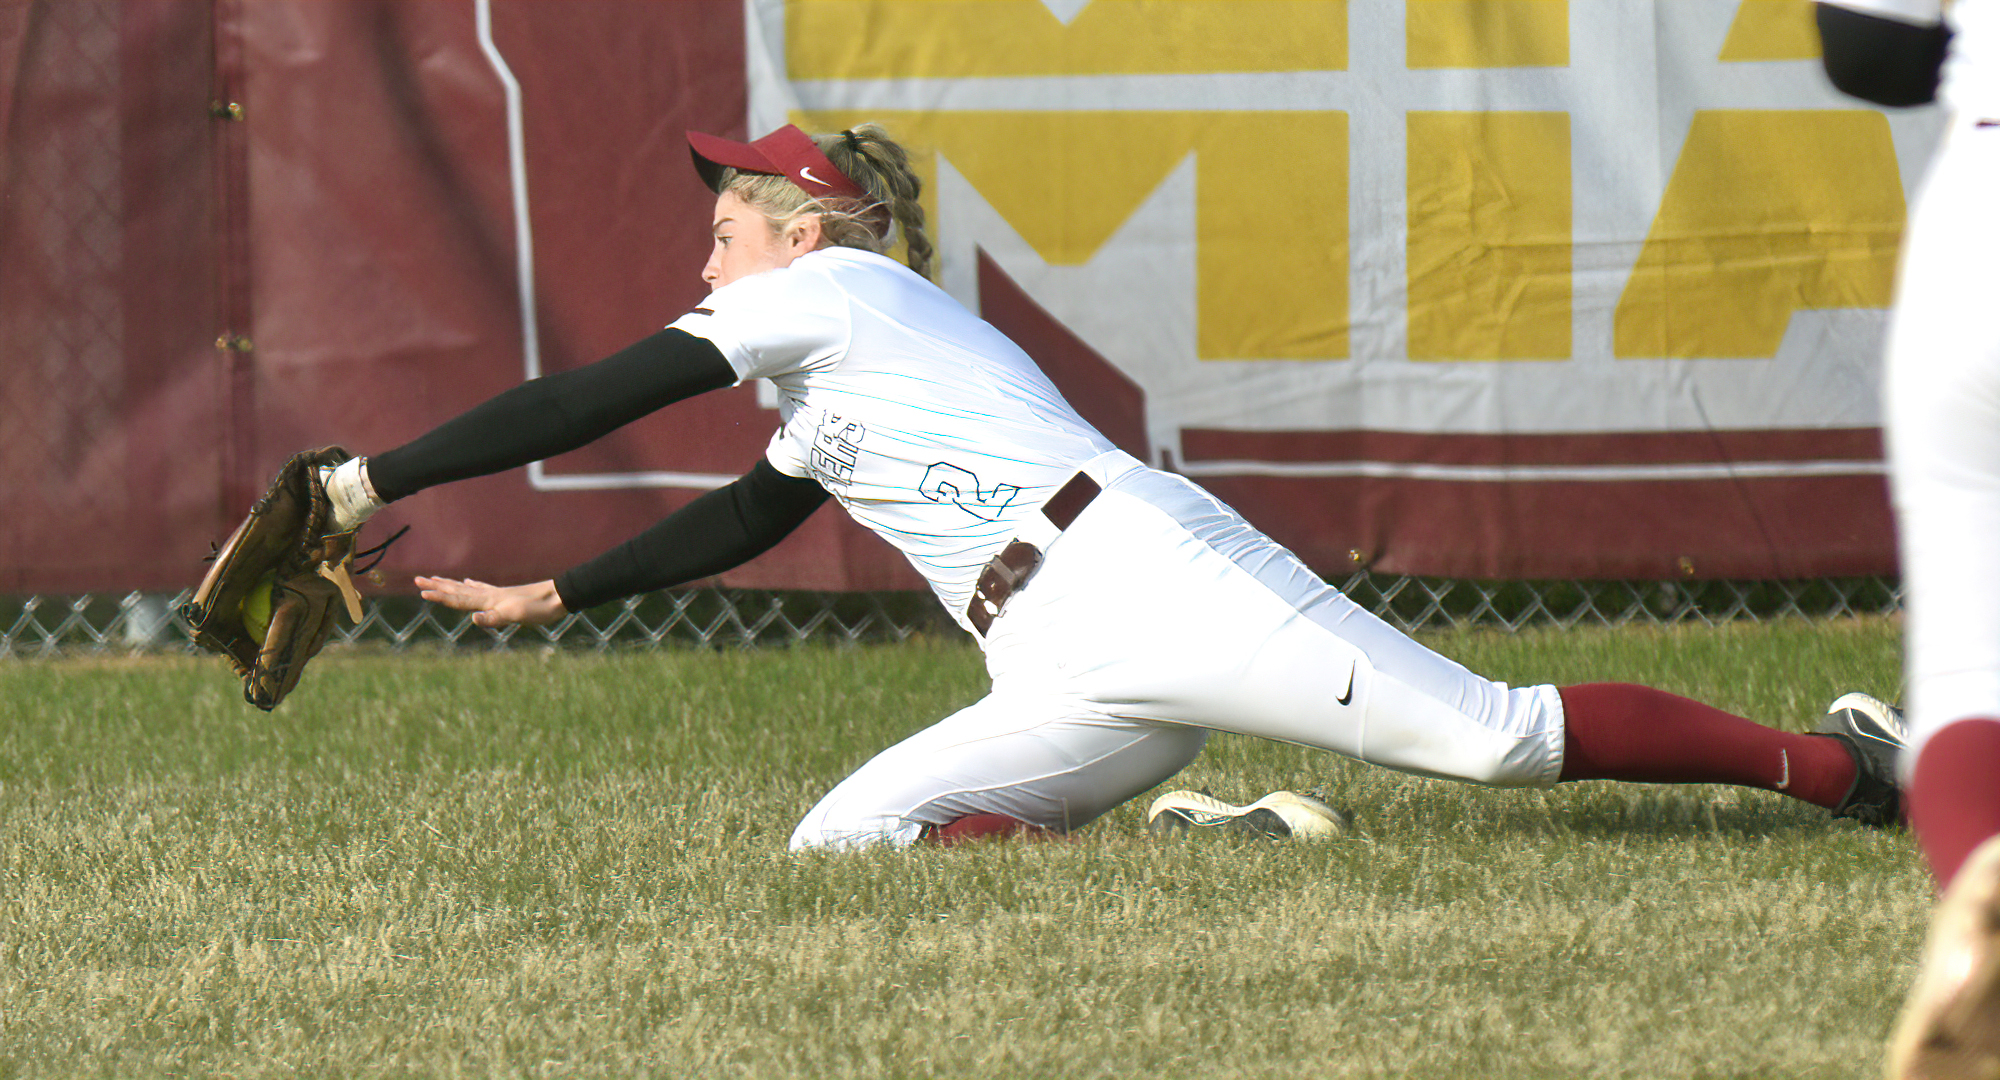 Cobber center fielder Landry Maragos had the Cobbers' first hit of the day on Day 4 in Florida. She is hitting .297 on the season and leads the team in stolen bases.